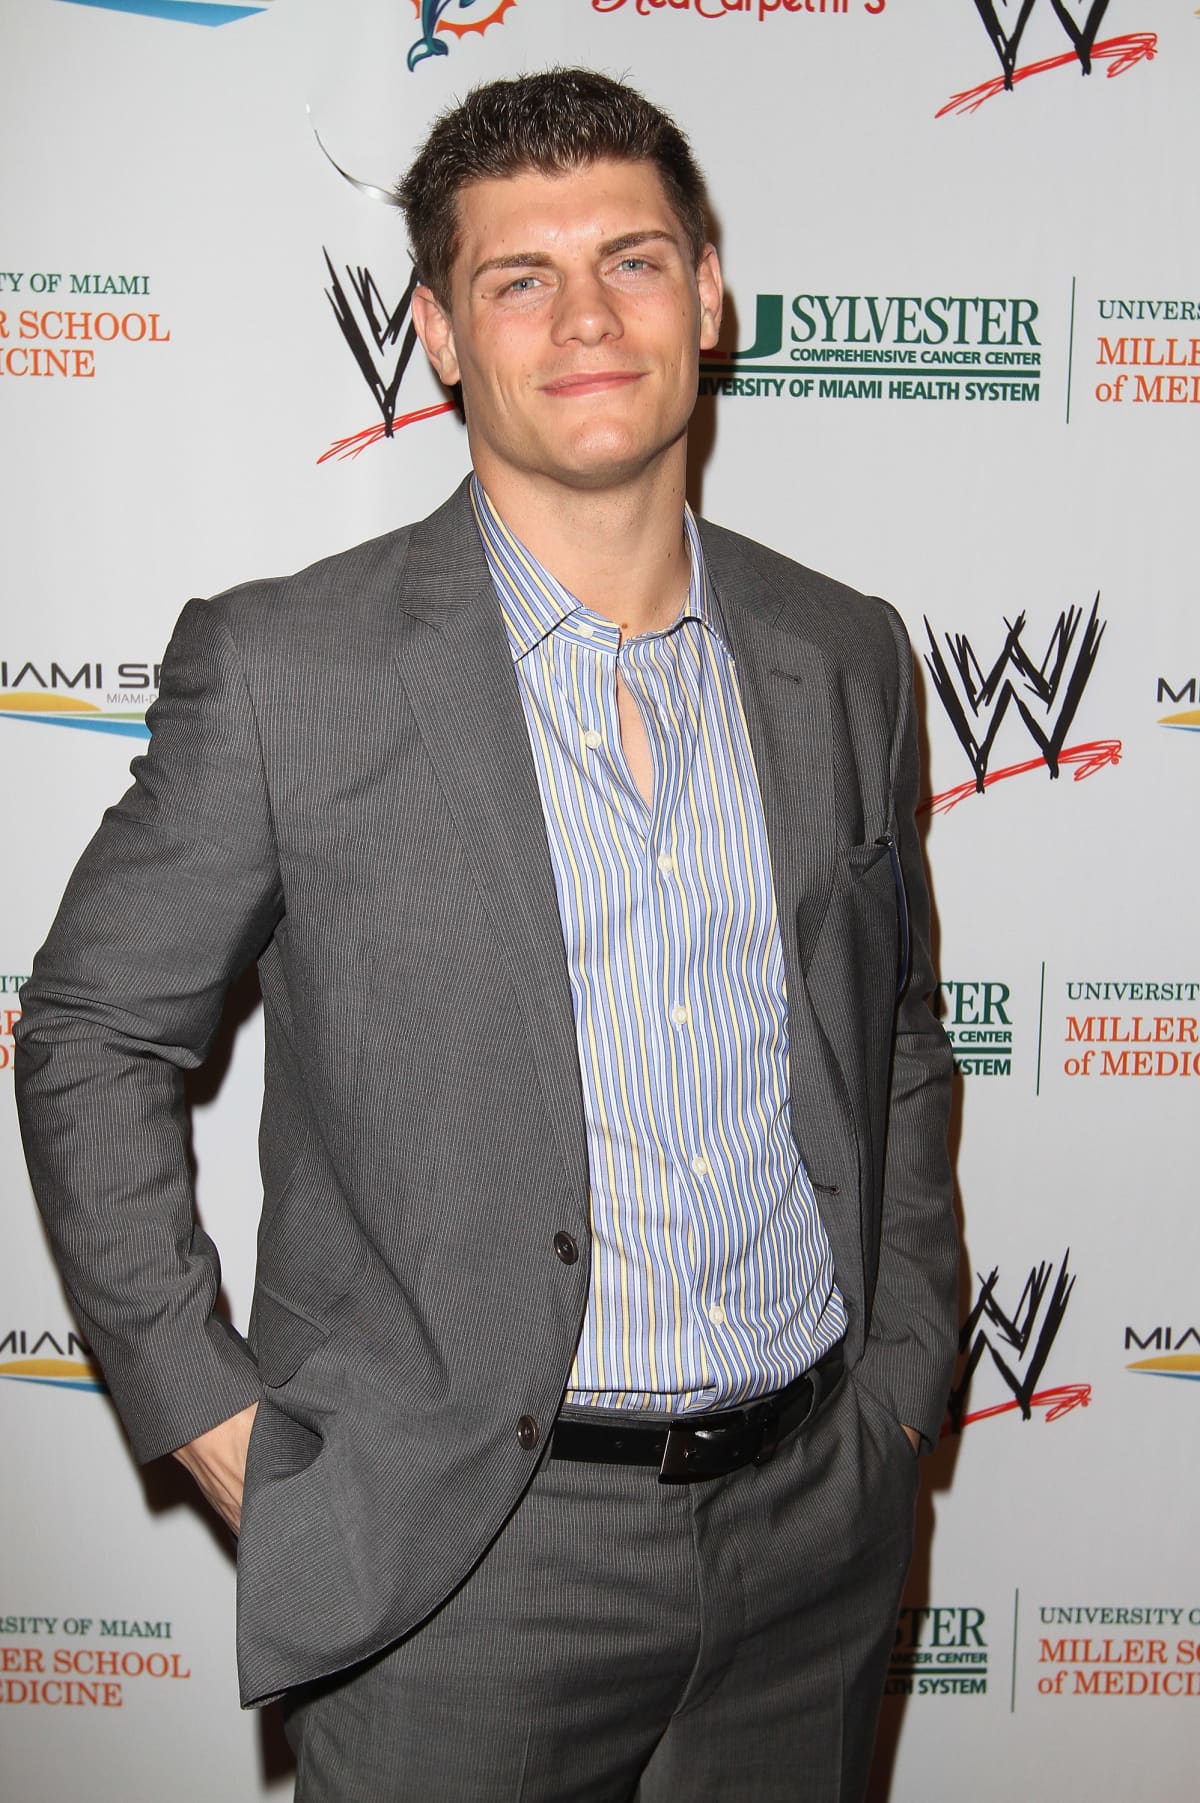 MIAMI BEACH, FL - MARCH 29:  WWE Superstar Cody Rhodes attends WrestleMania Premiere Party A Celebration of Miami Art and Fashion on March 29, 2012 in Miami Beach, Florida.  (Photo by Alexander Tamargo/WWE/Getty Images for WWE)